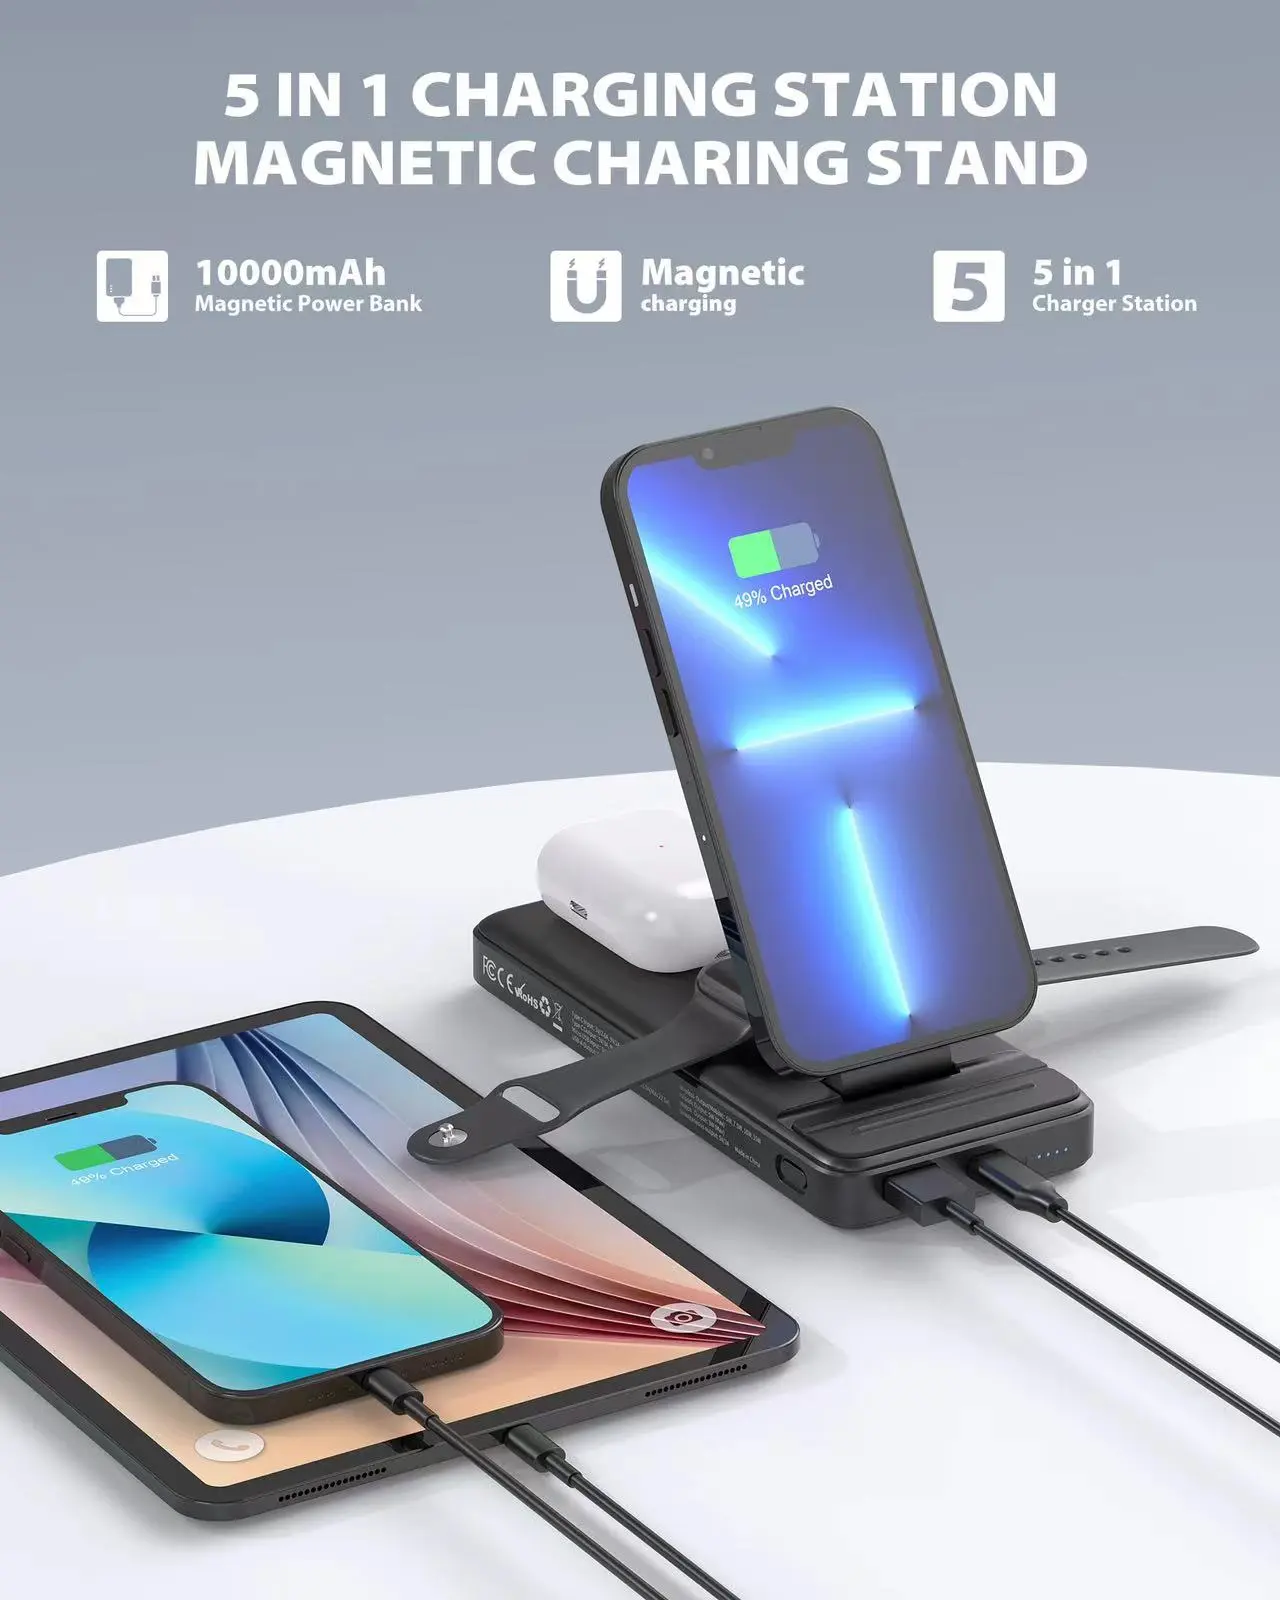 5in1 charging station